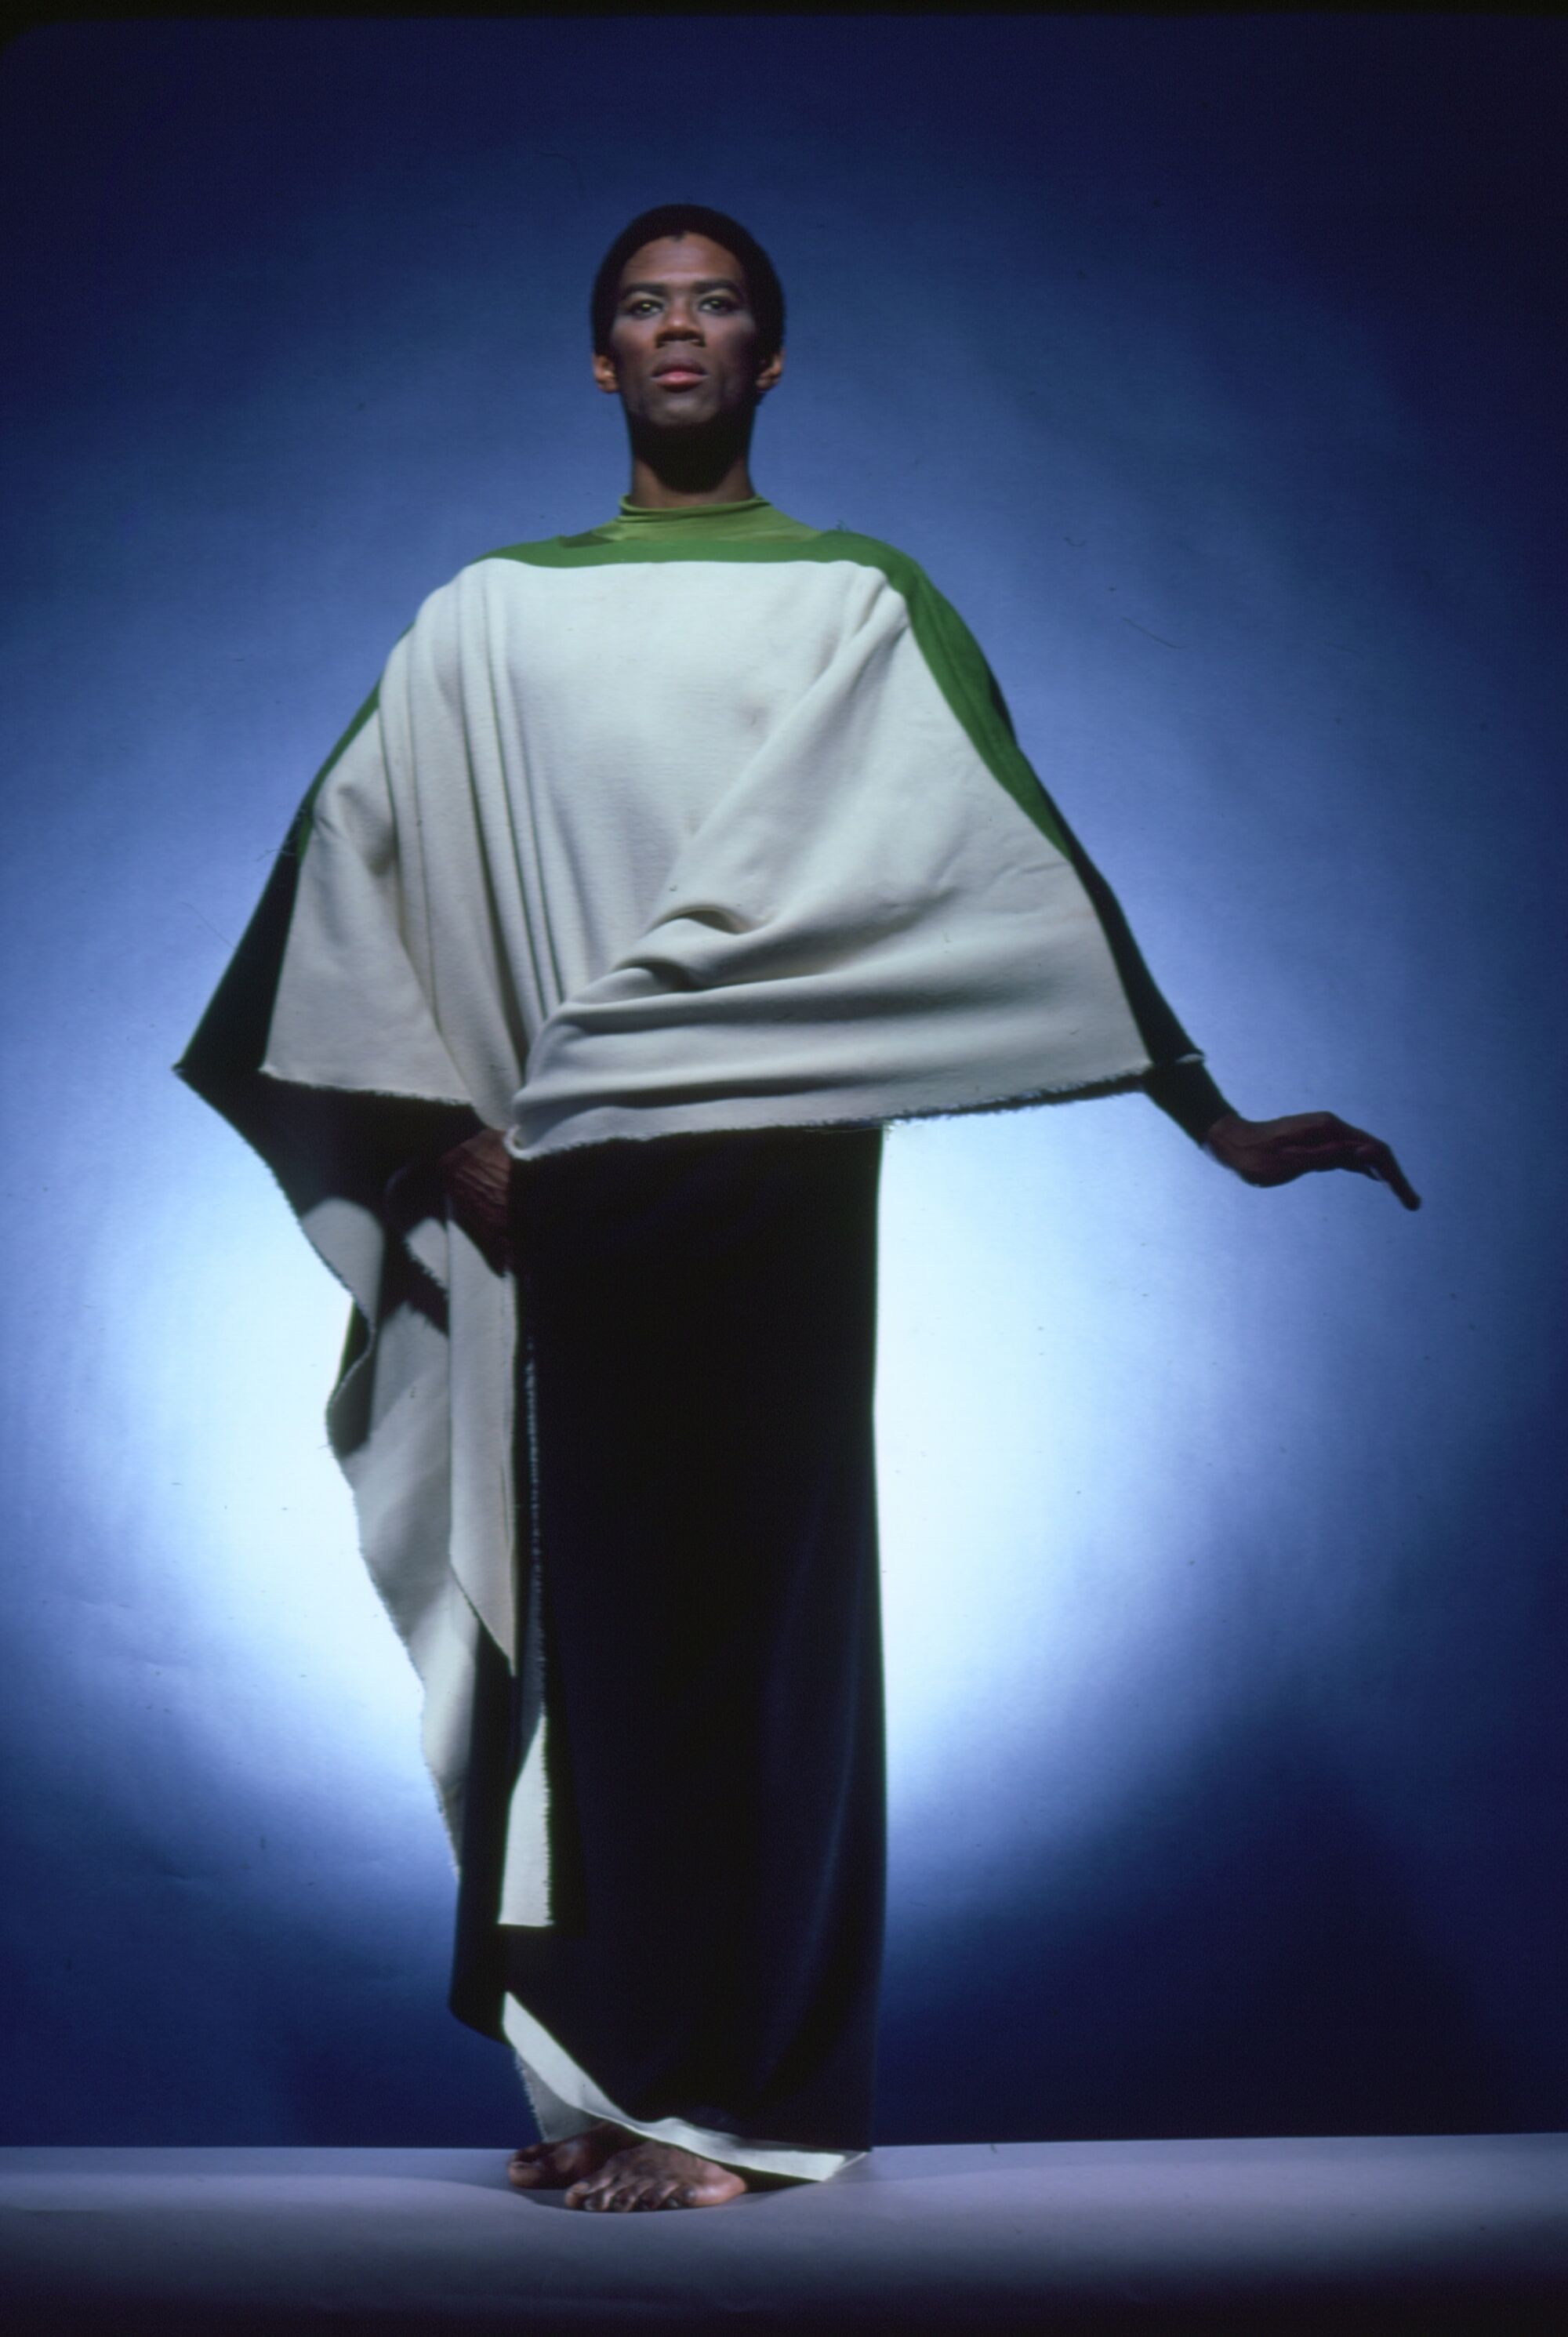 A dancer wearing a draped white and green costume.